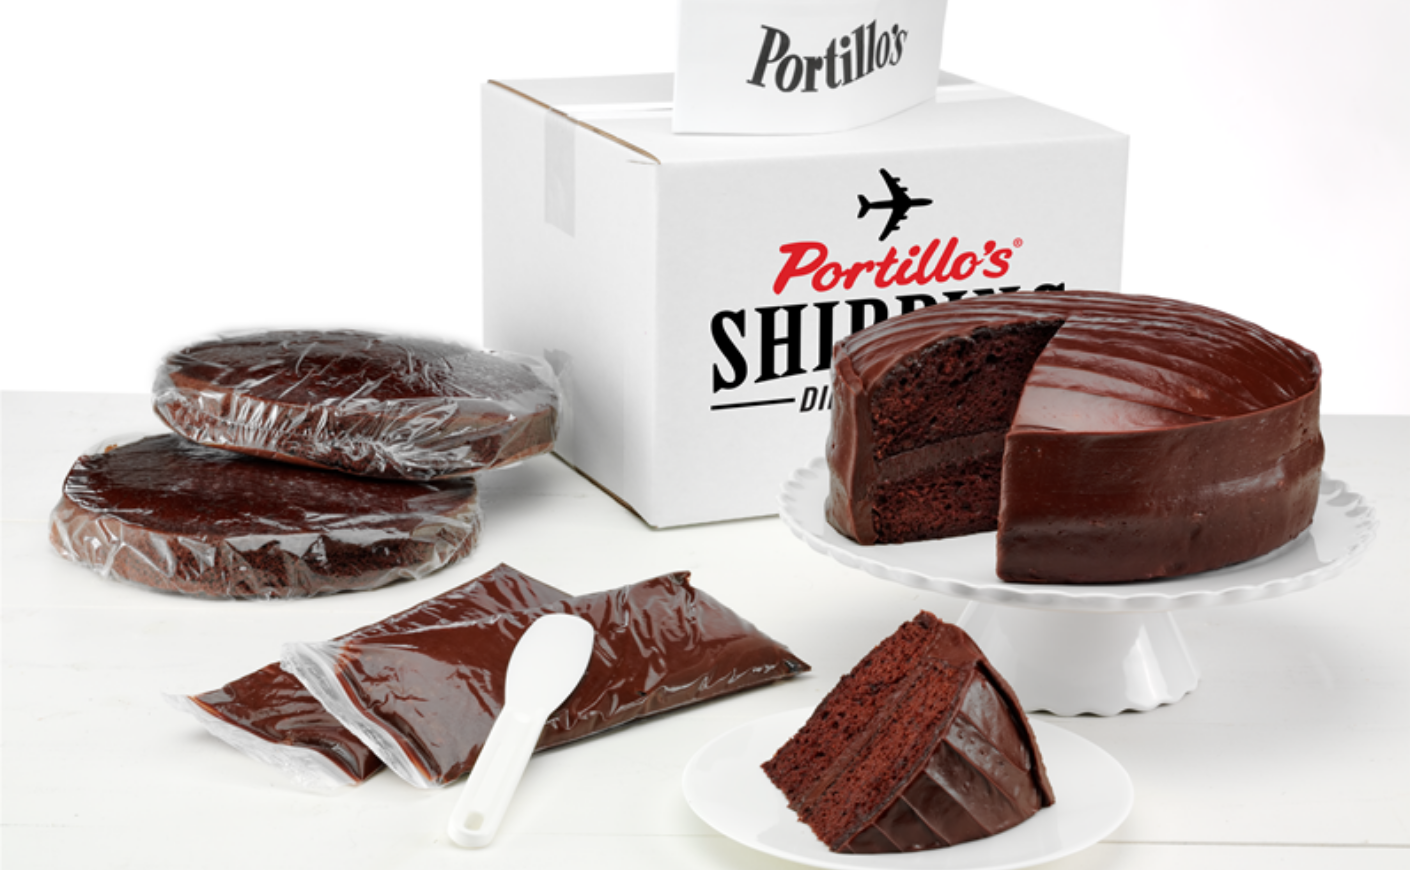 Portillo's chocolate cake with box and utensils